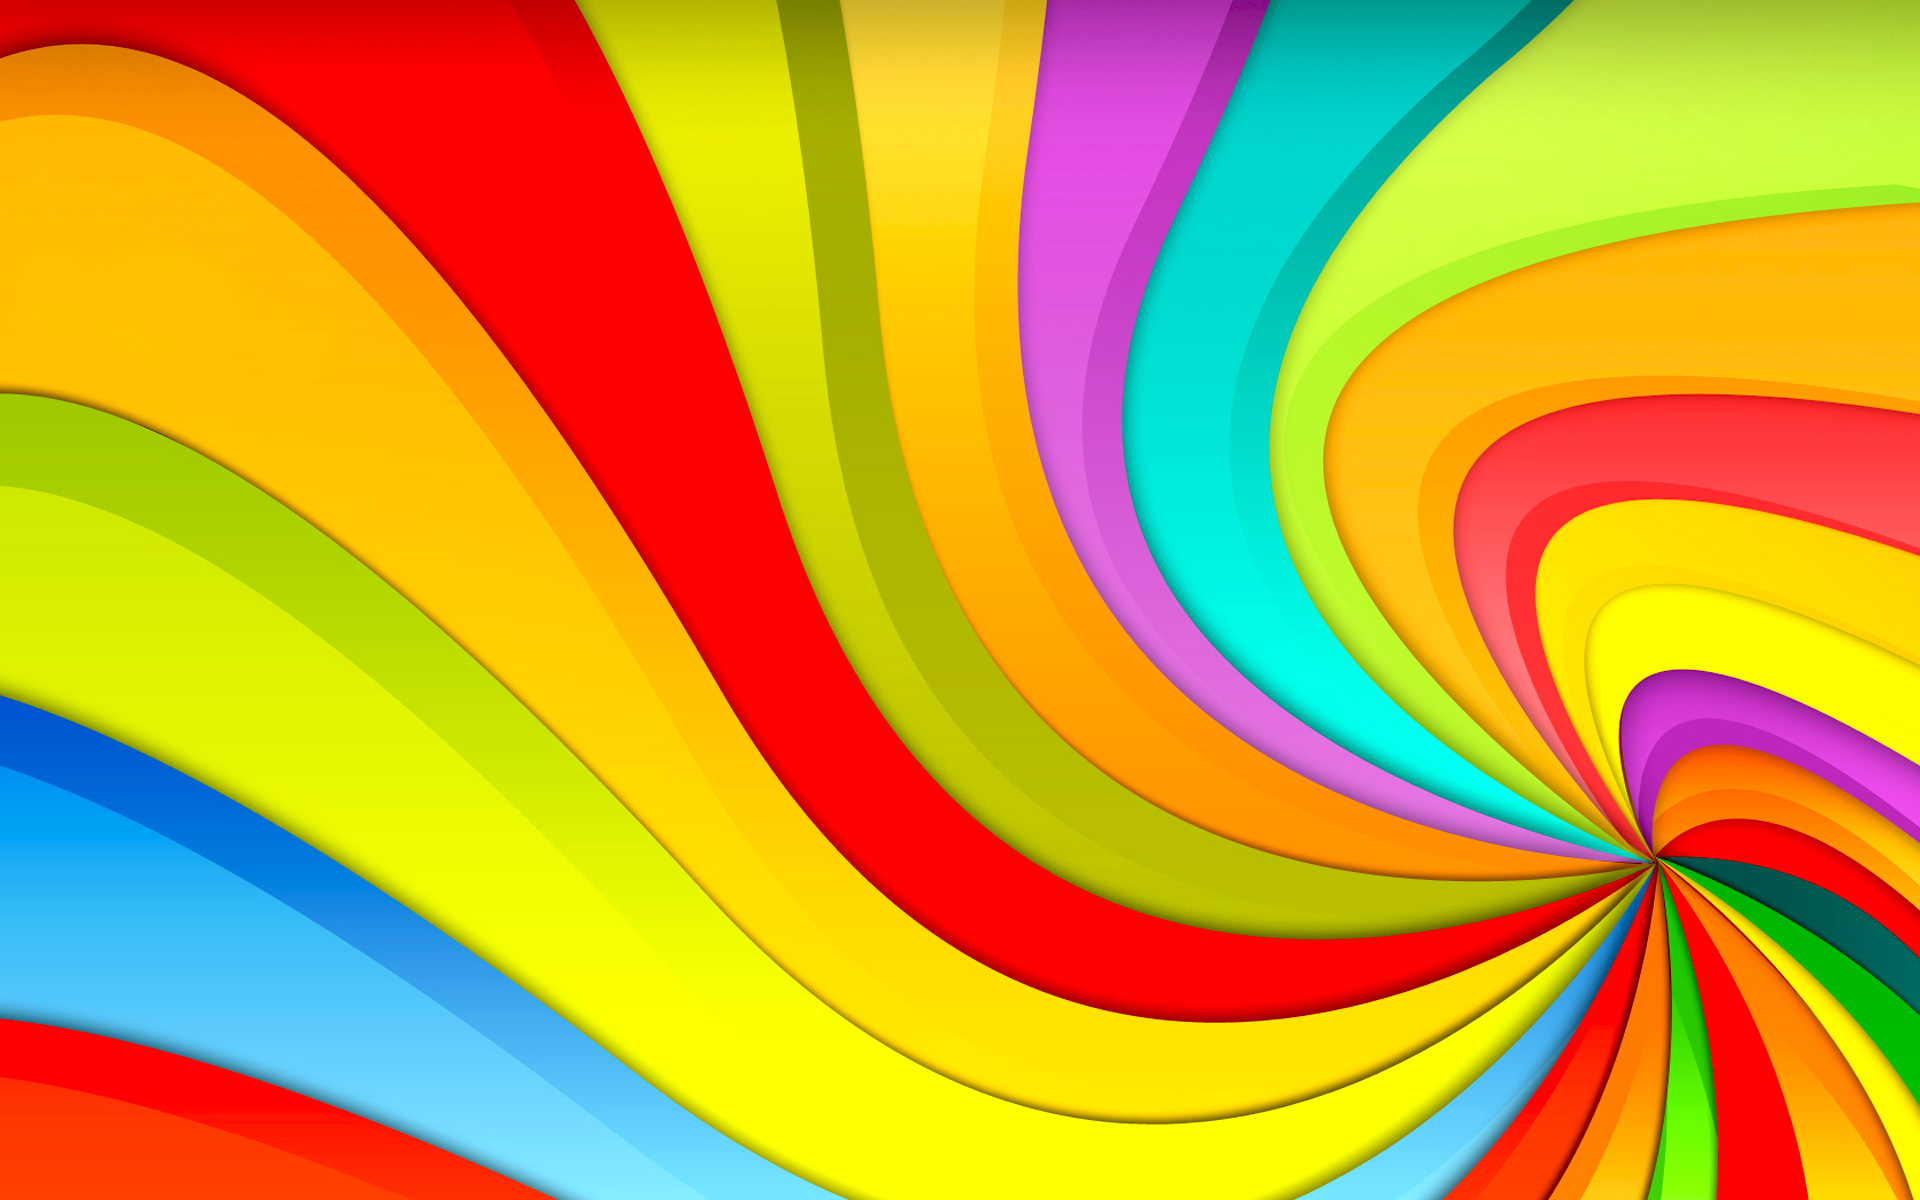 1920x1200 Free download Swirly Wallpapers Rainbowy Swirly HD Wallpapers Rainbowy Swirly [] for your Desktop, Mobile \u0026 Tablet | Explore 78+ Swirly Backgrounds | Swirly Backgrounds, Swirly Wallpaper, Swirly Background